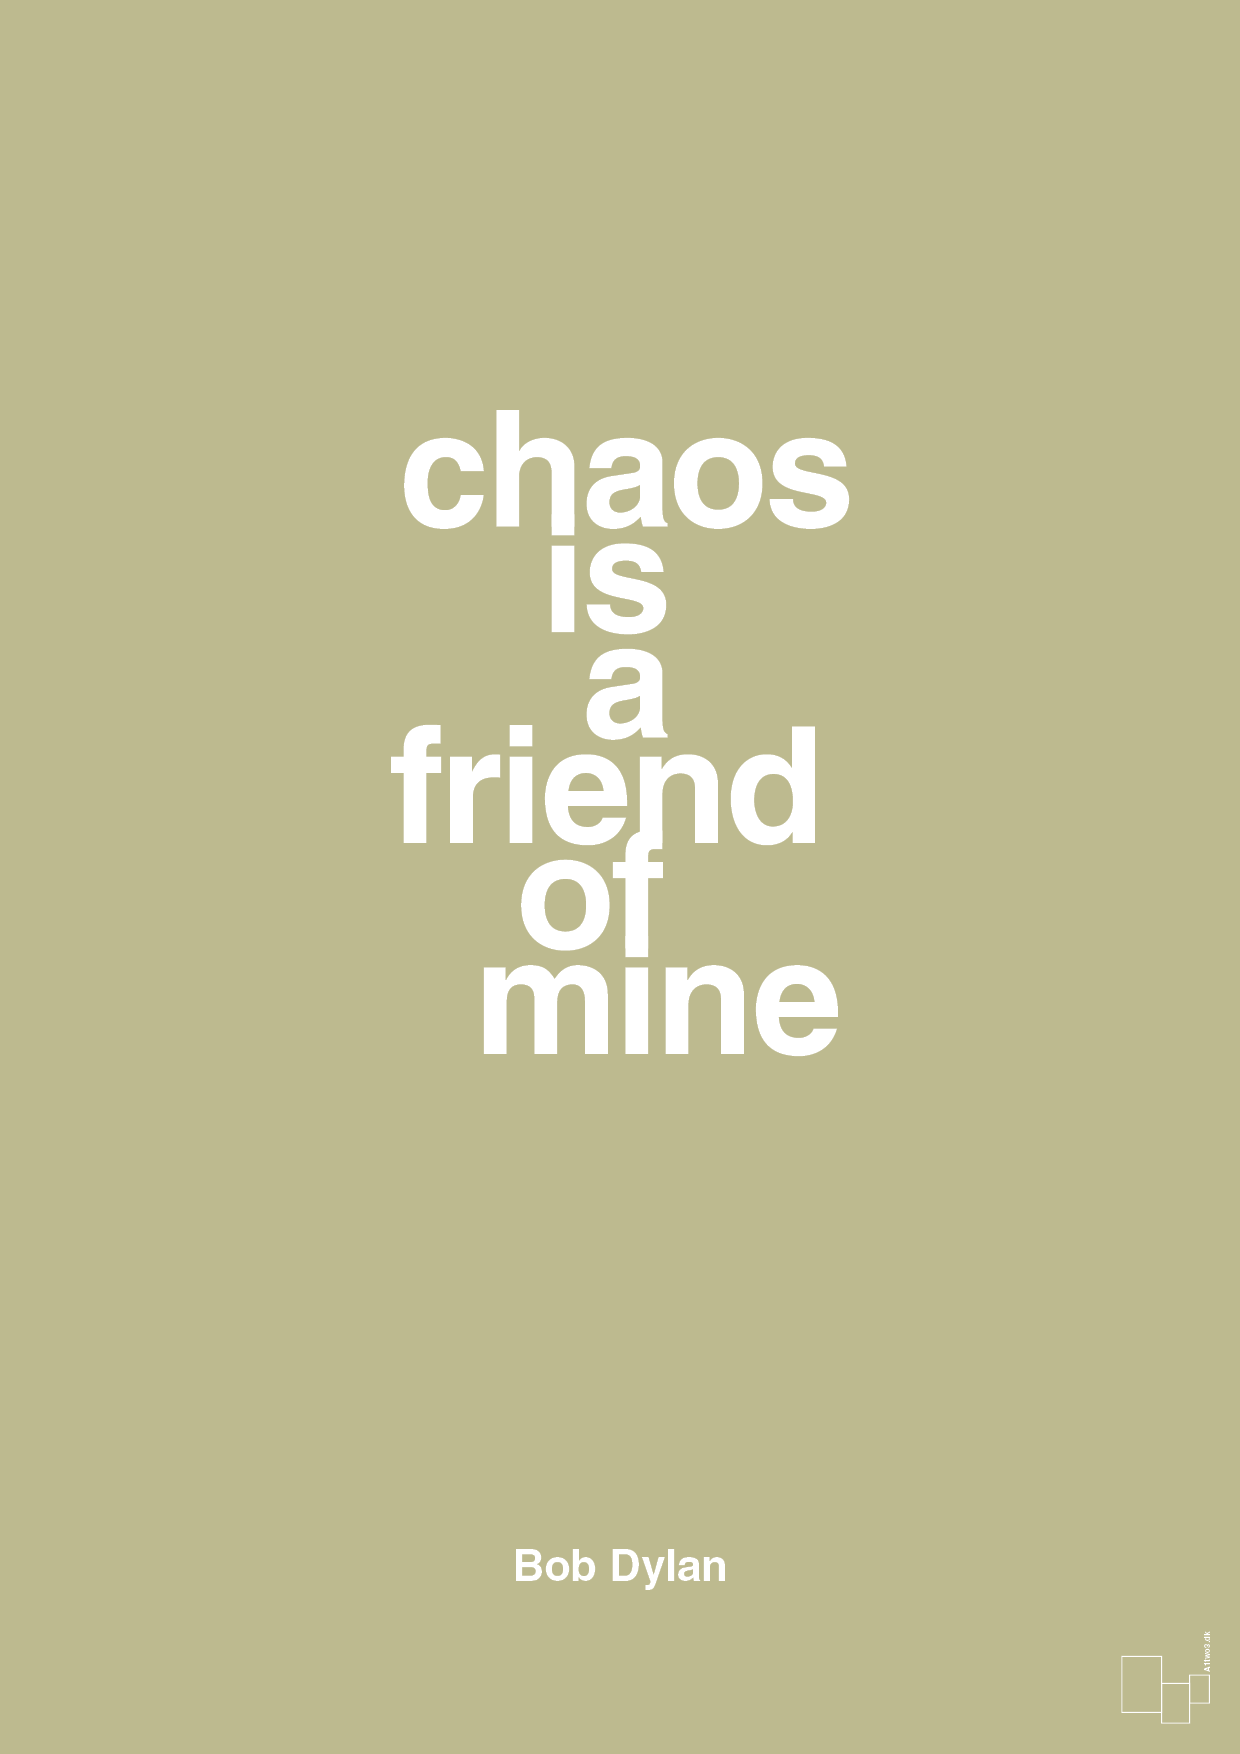 chaos is a friend of mine - Plakat med Citater i Back to Nature